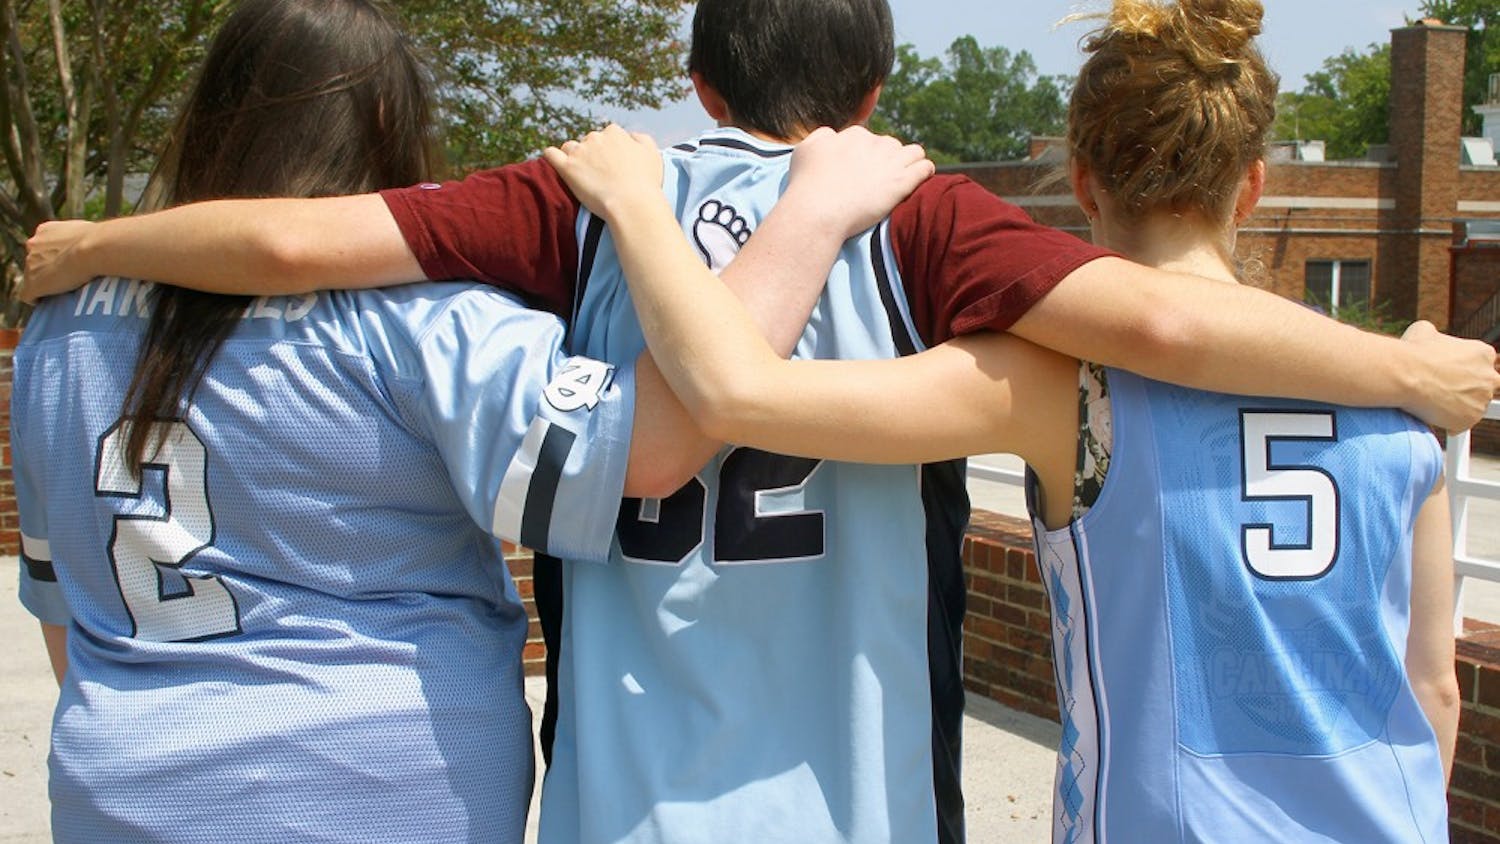 UNC may enact a policy that prohibits prominent players’ numbers on jerseys from being sold.